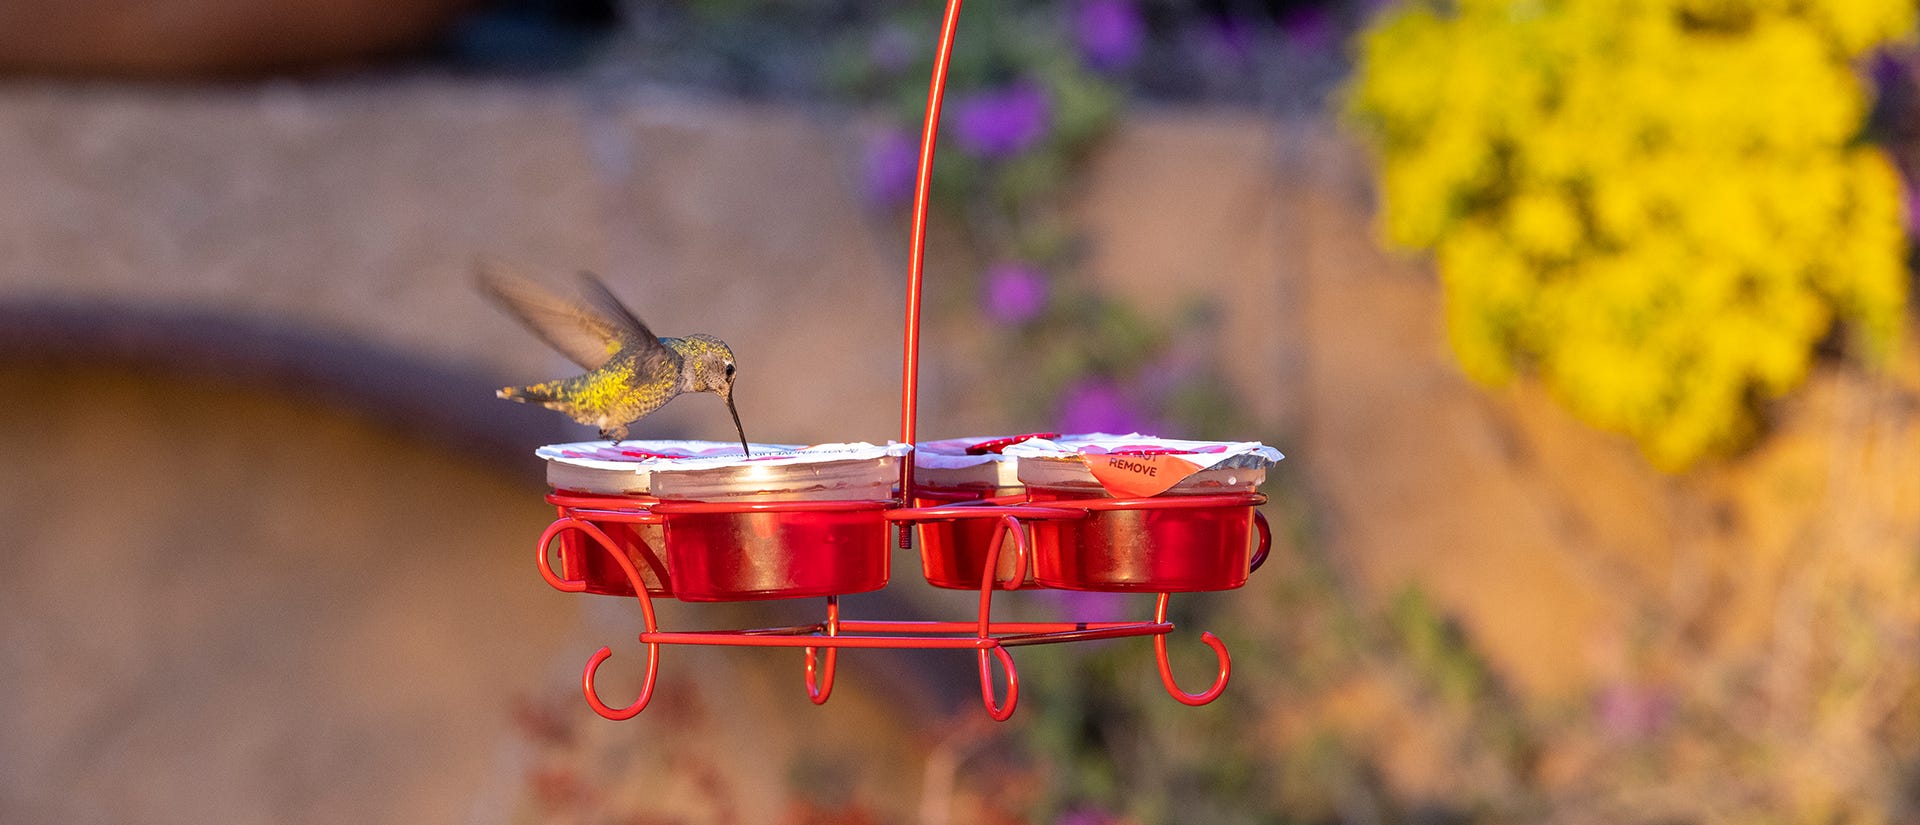 12 amazing facts about hummingbirds; hummingbirds visiting More Birds Nectar Pods Wireform Hummingbird Feeder